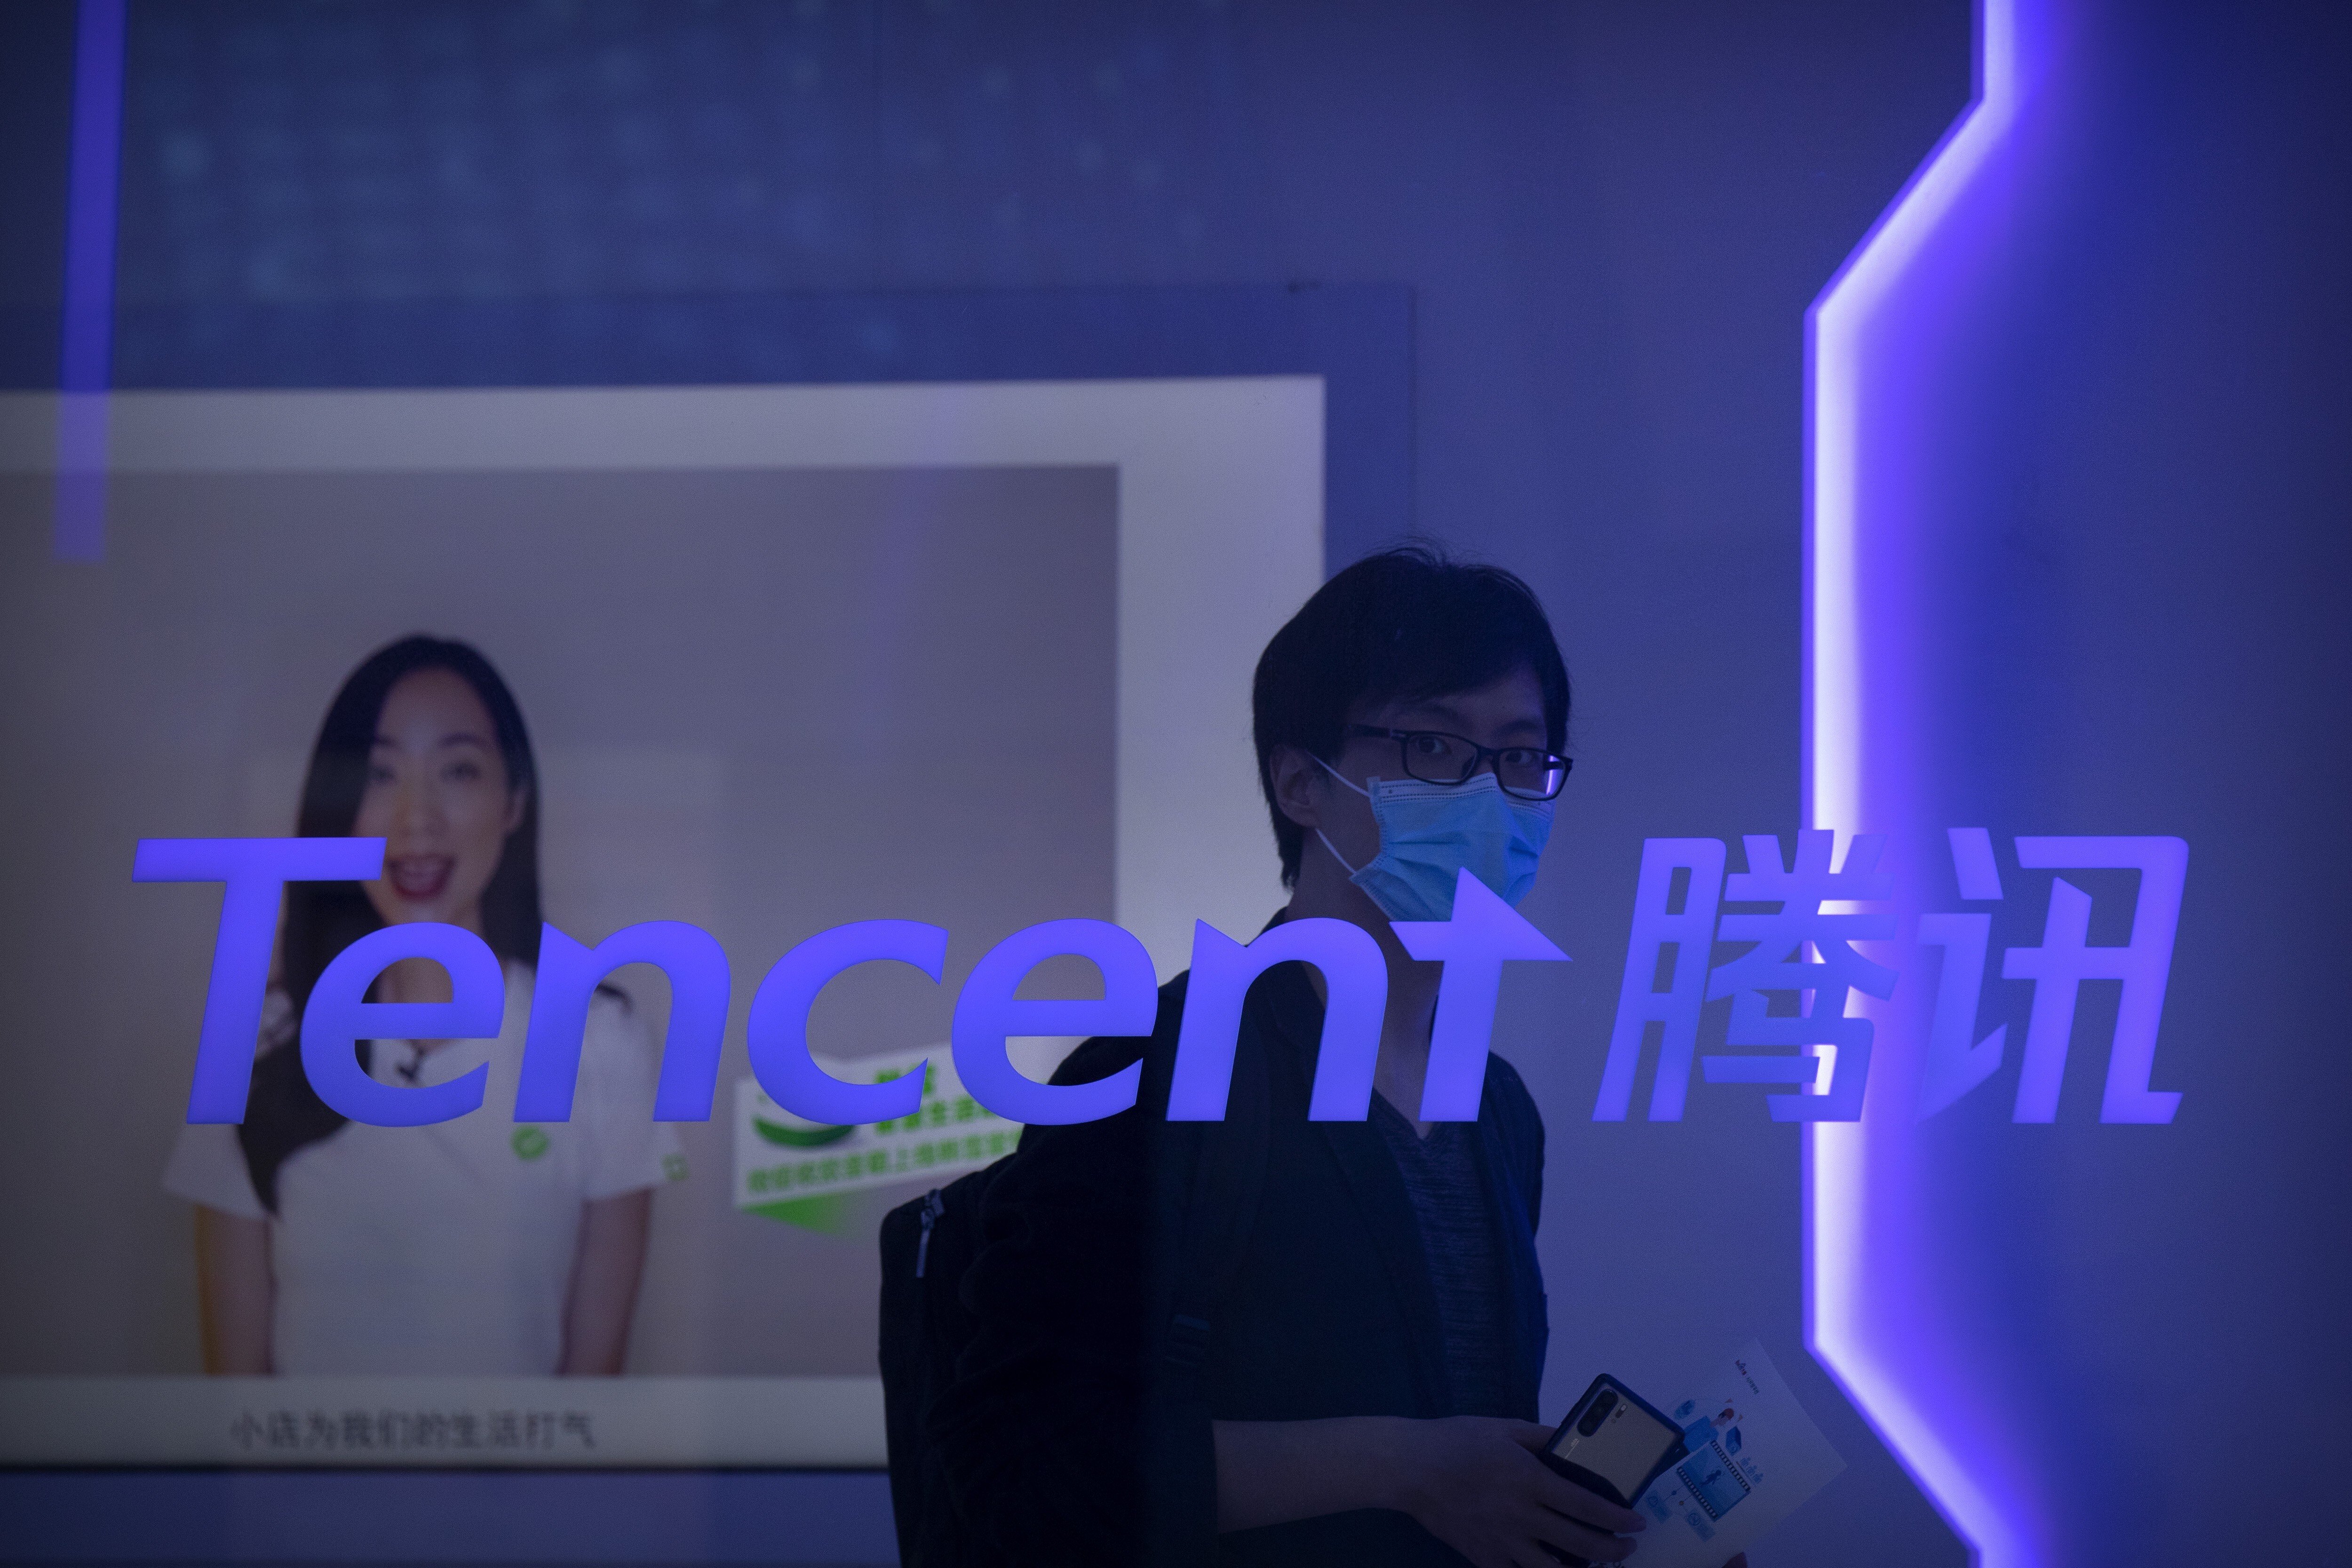 A visitor walks past a logo for Tencent at the company’s display at the China International Fair for Trade in Services in Beijing, China, on September 5, 2020. Photo: AP Photo